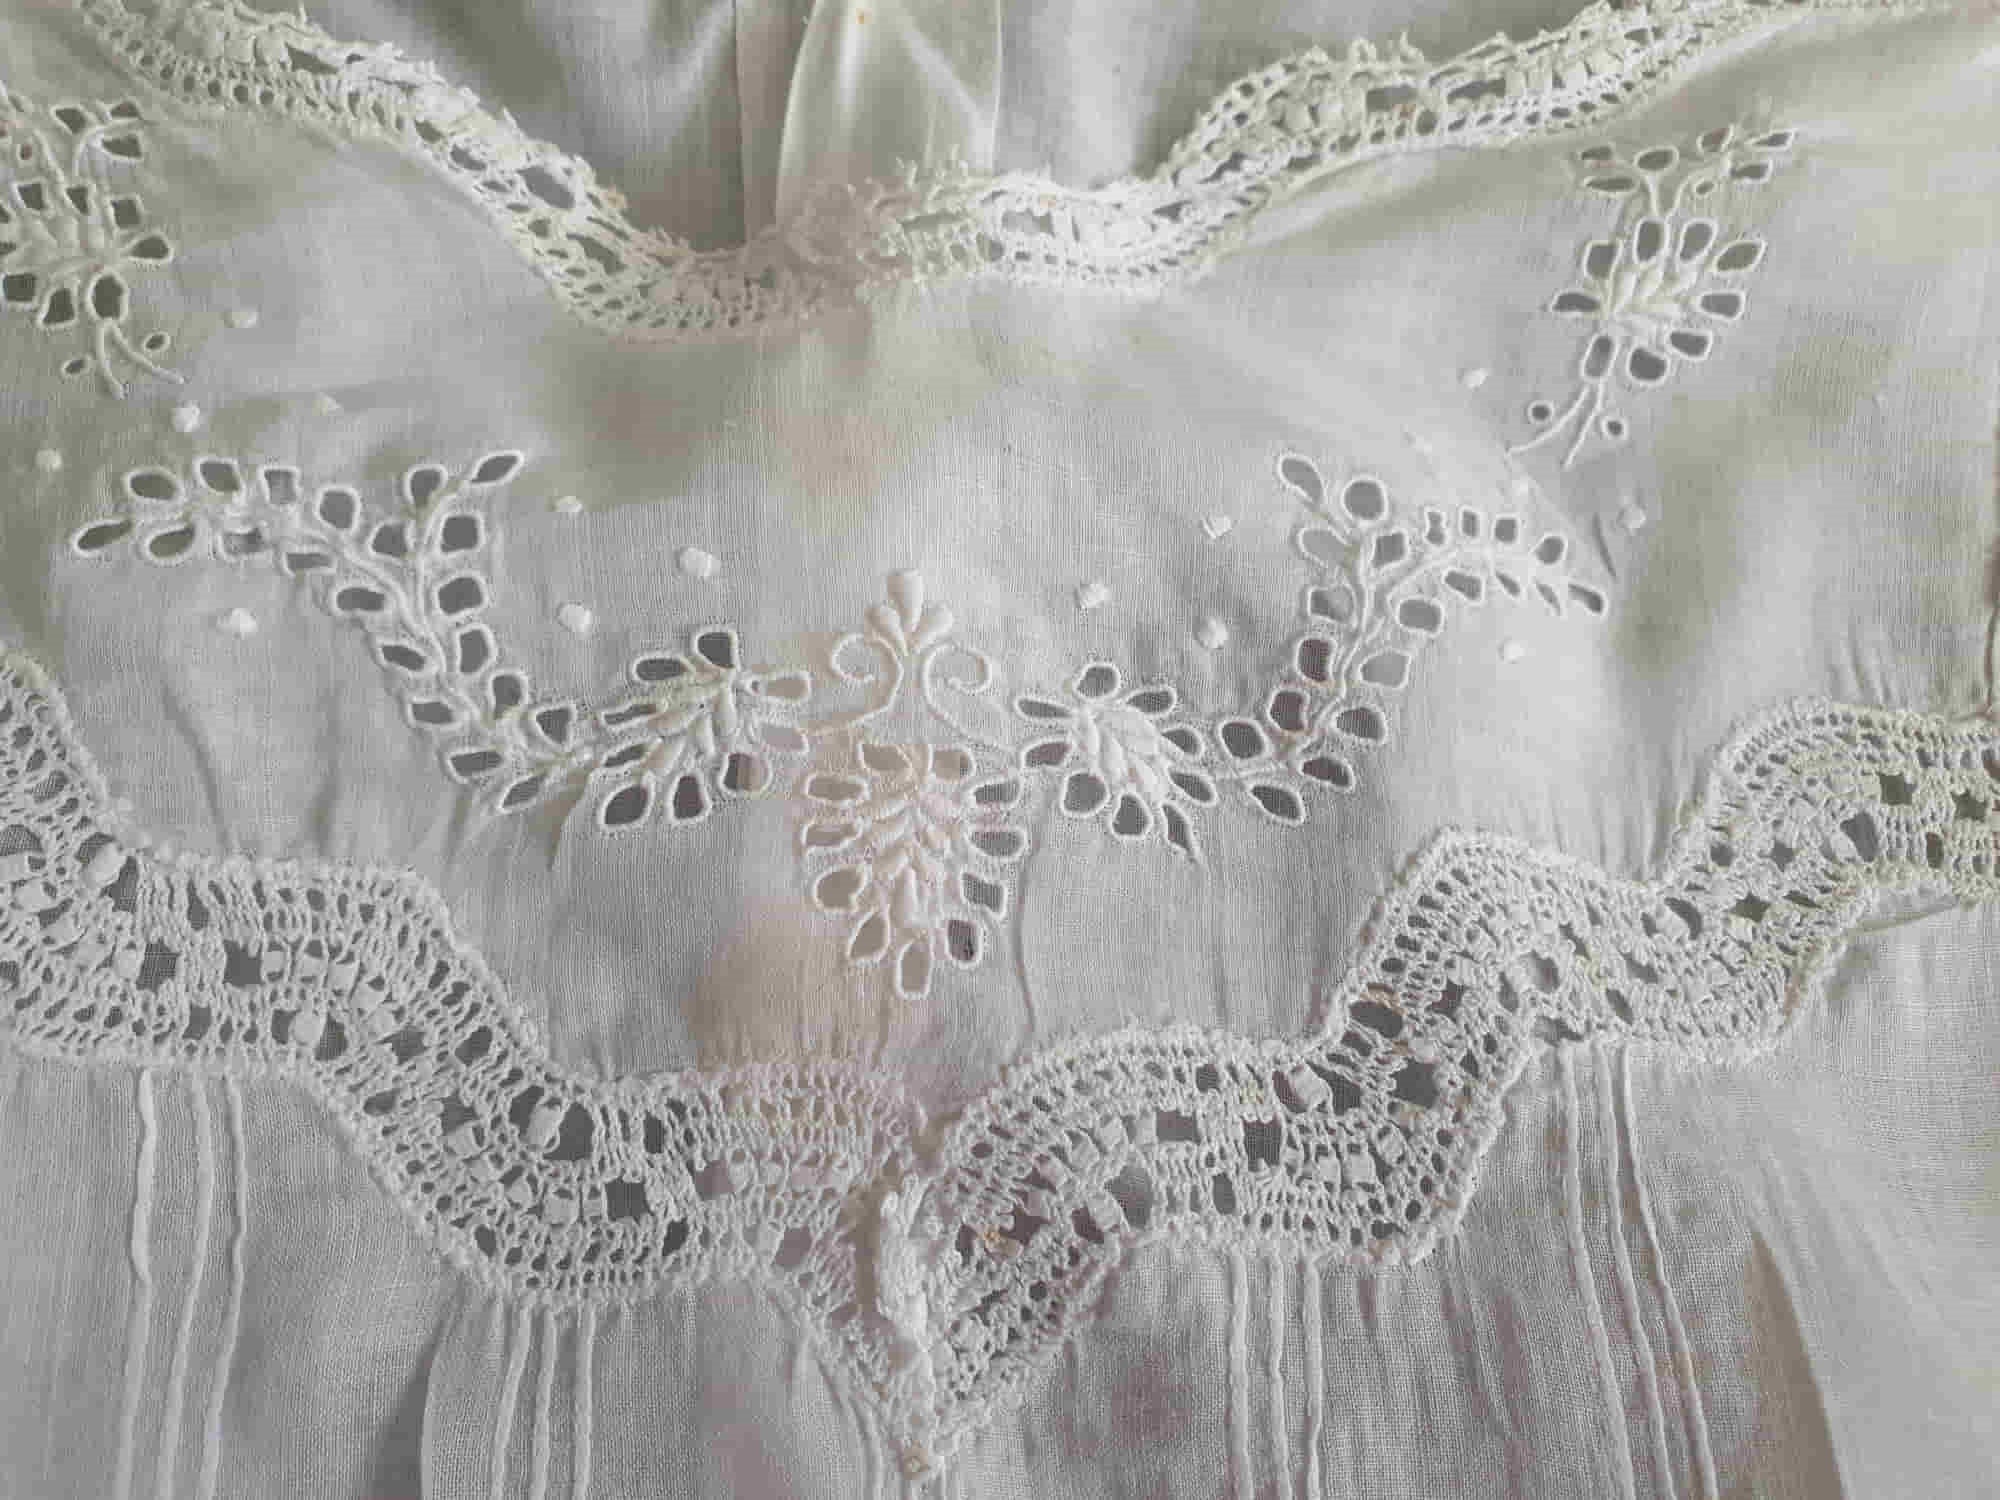 edwardian victorian antique camisole corset cover blouse with embroidery lace and pin tucks Medium